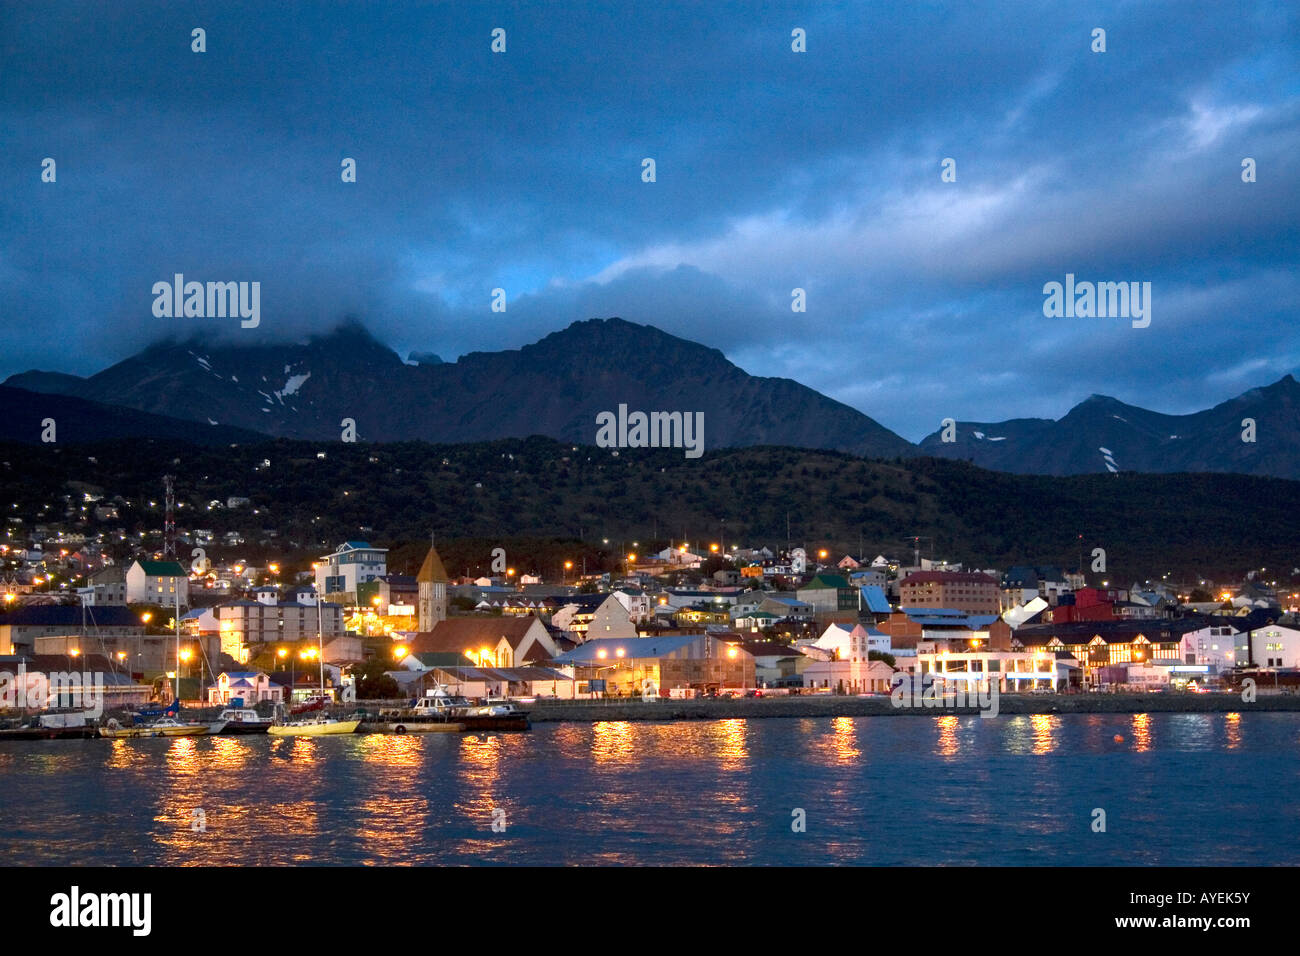 The harbor and city of Ushuaia at dusk on the island of Tierra del Fuego Argentina Stock Photo